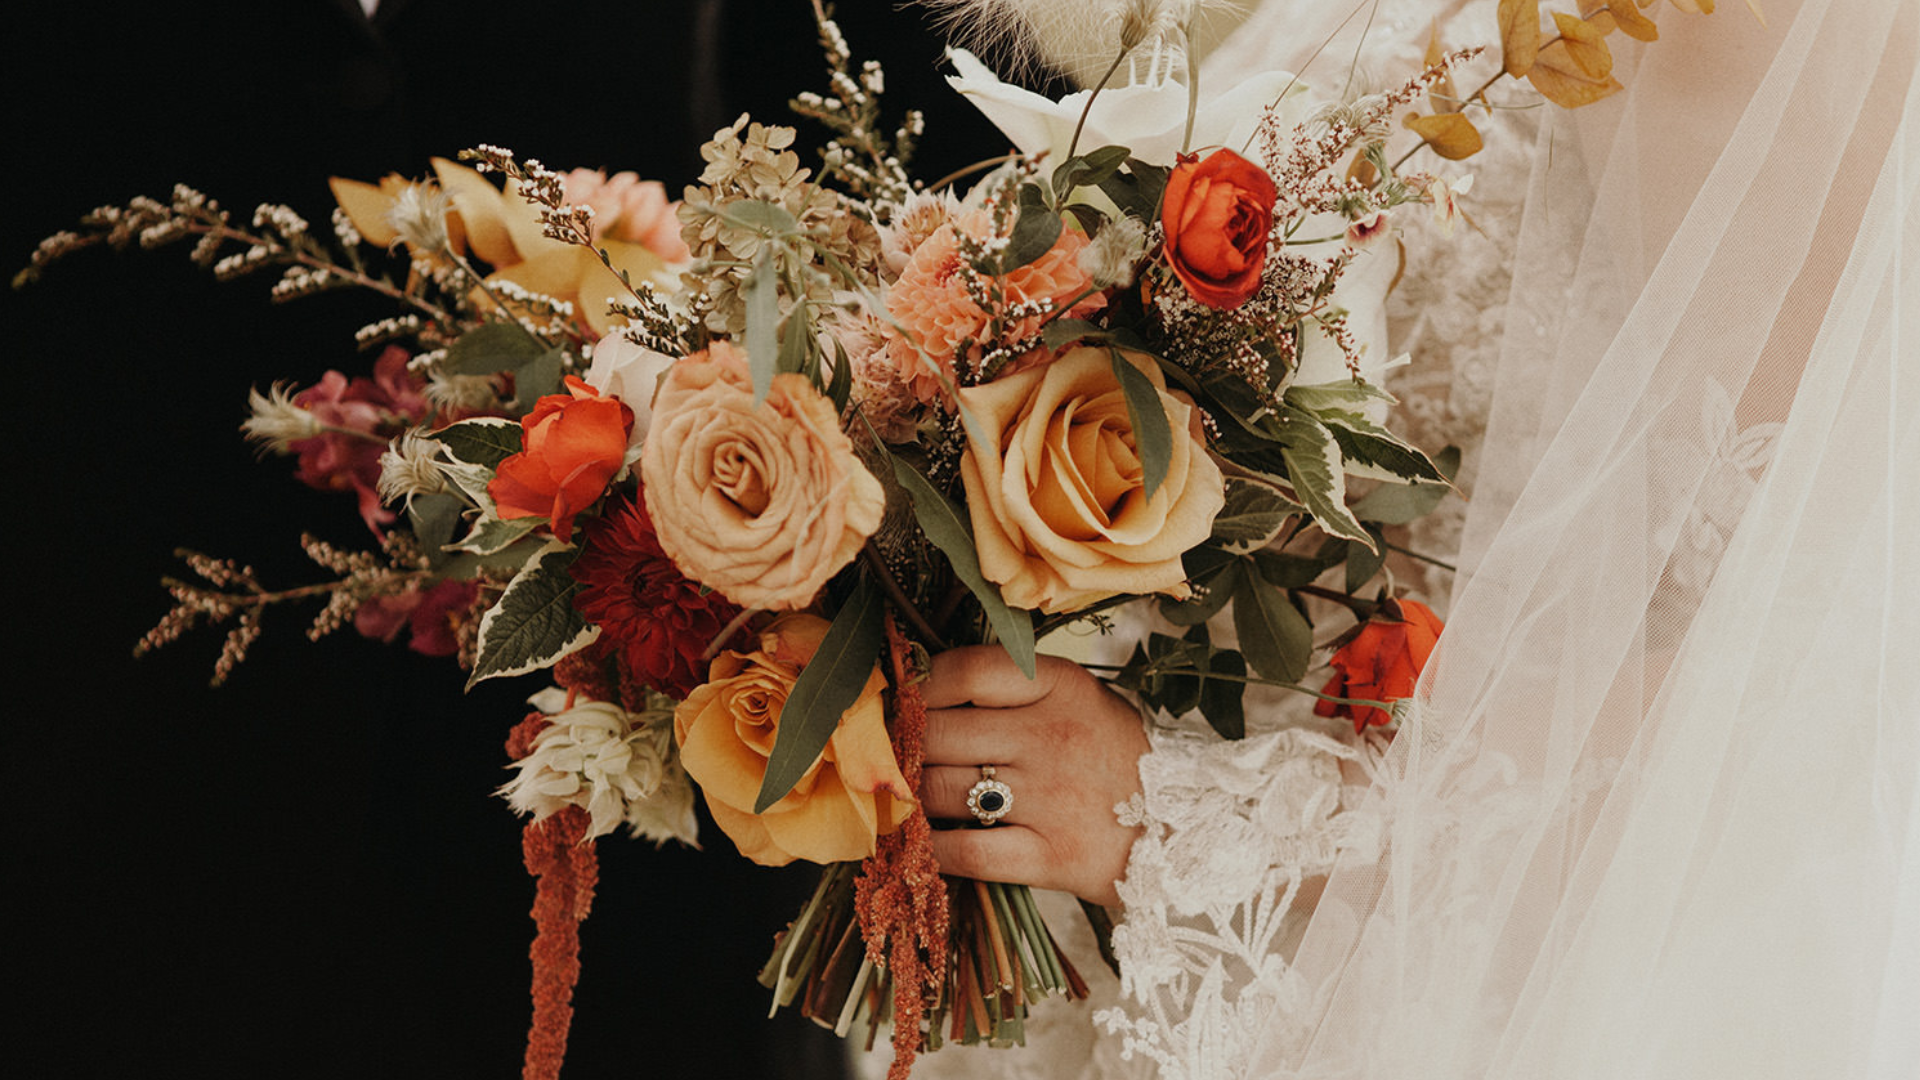 11 Reasons to Fall for Autumn Weddings